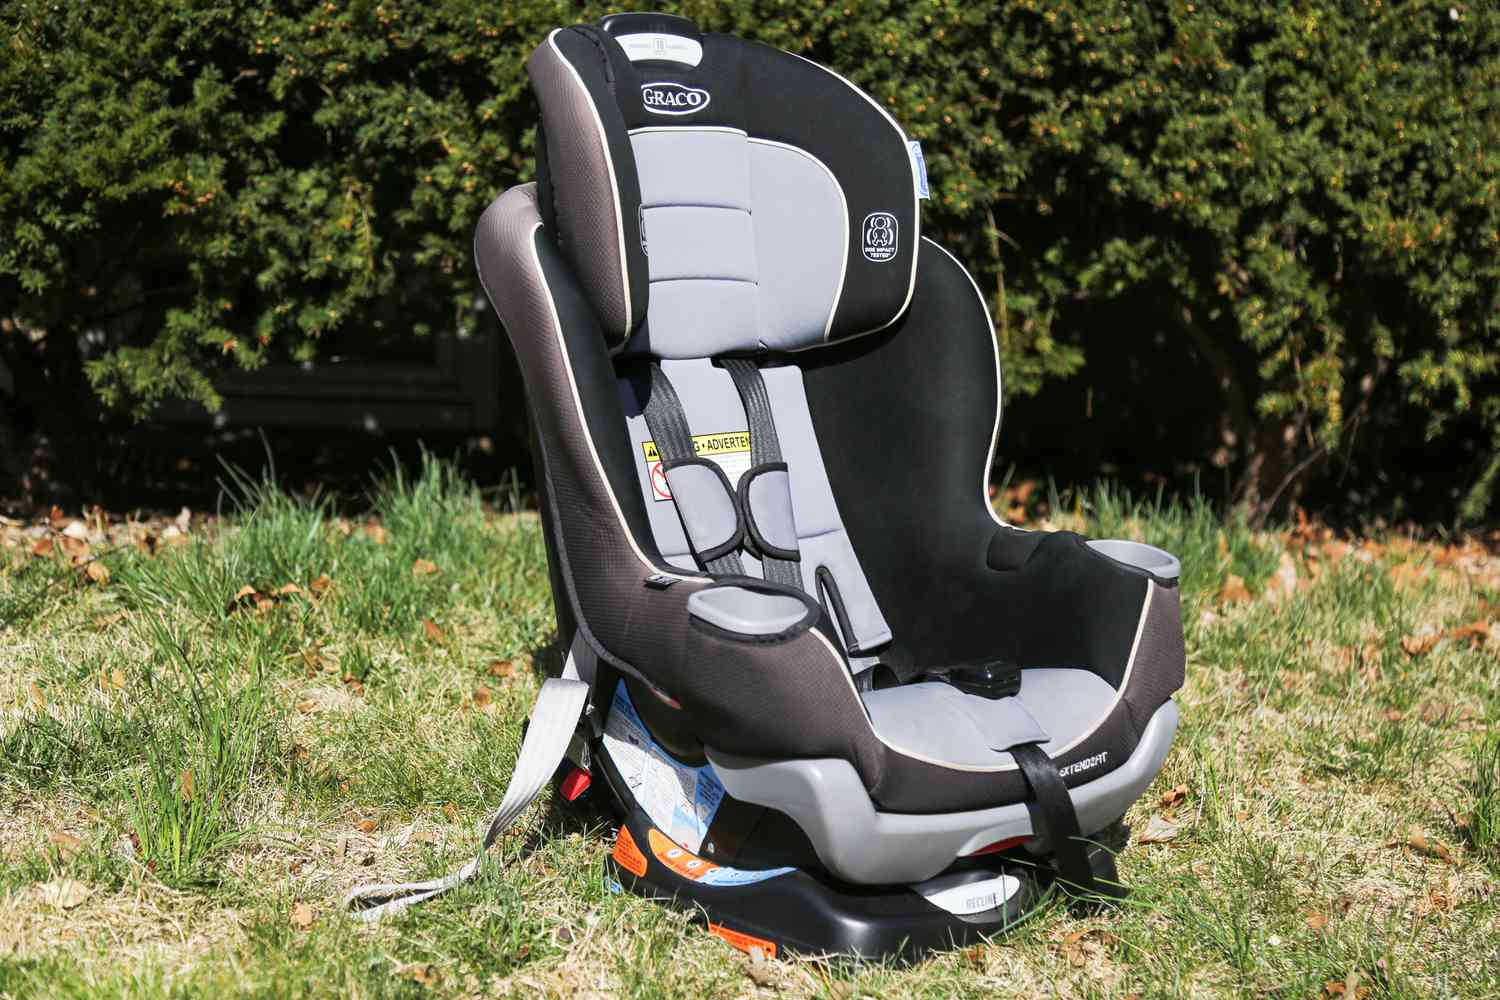 The Graco Extend2Fit Convertible Car Seat sitting on the grass